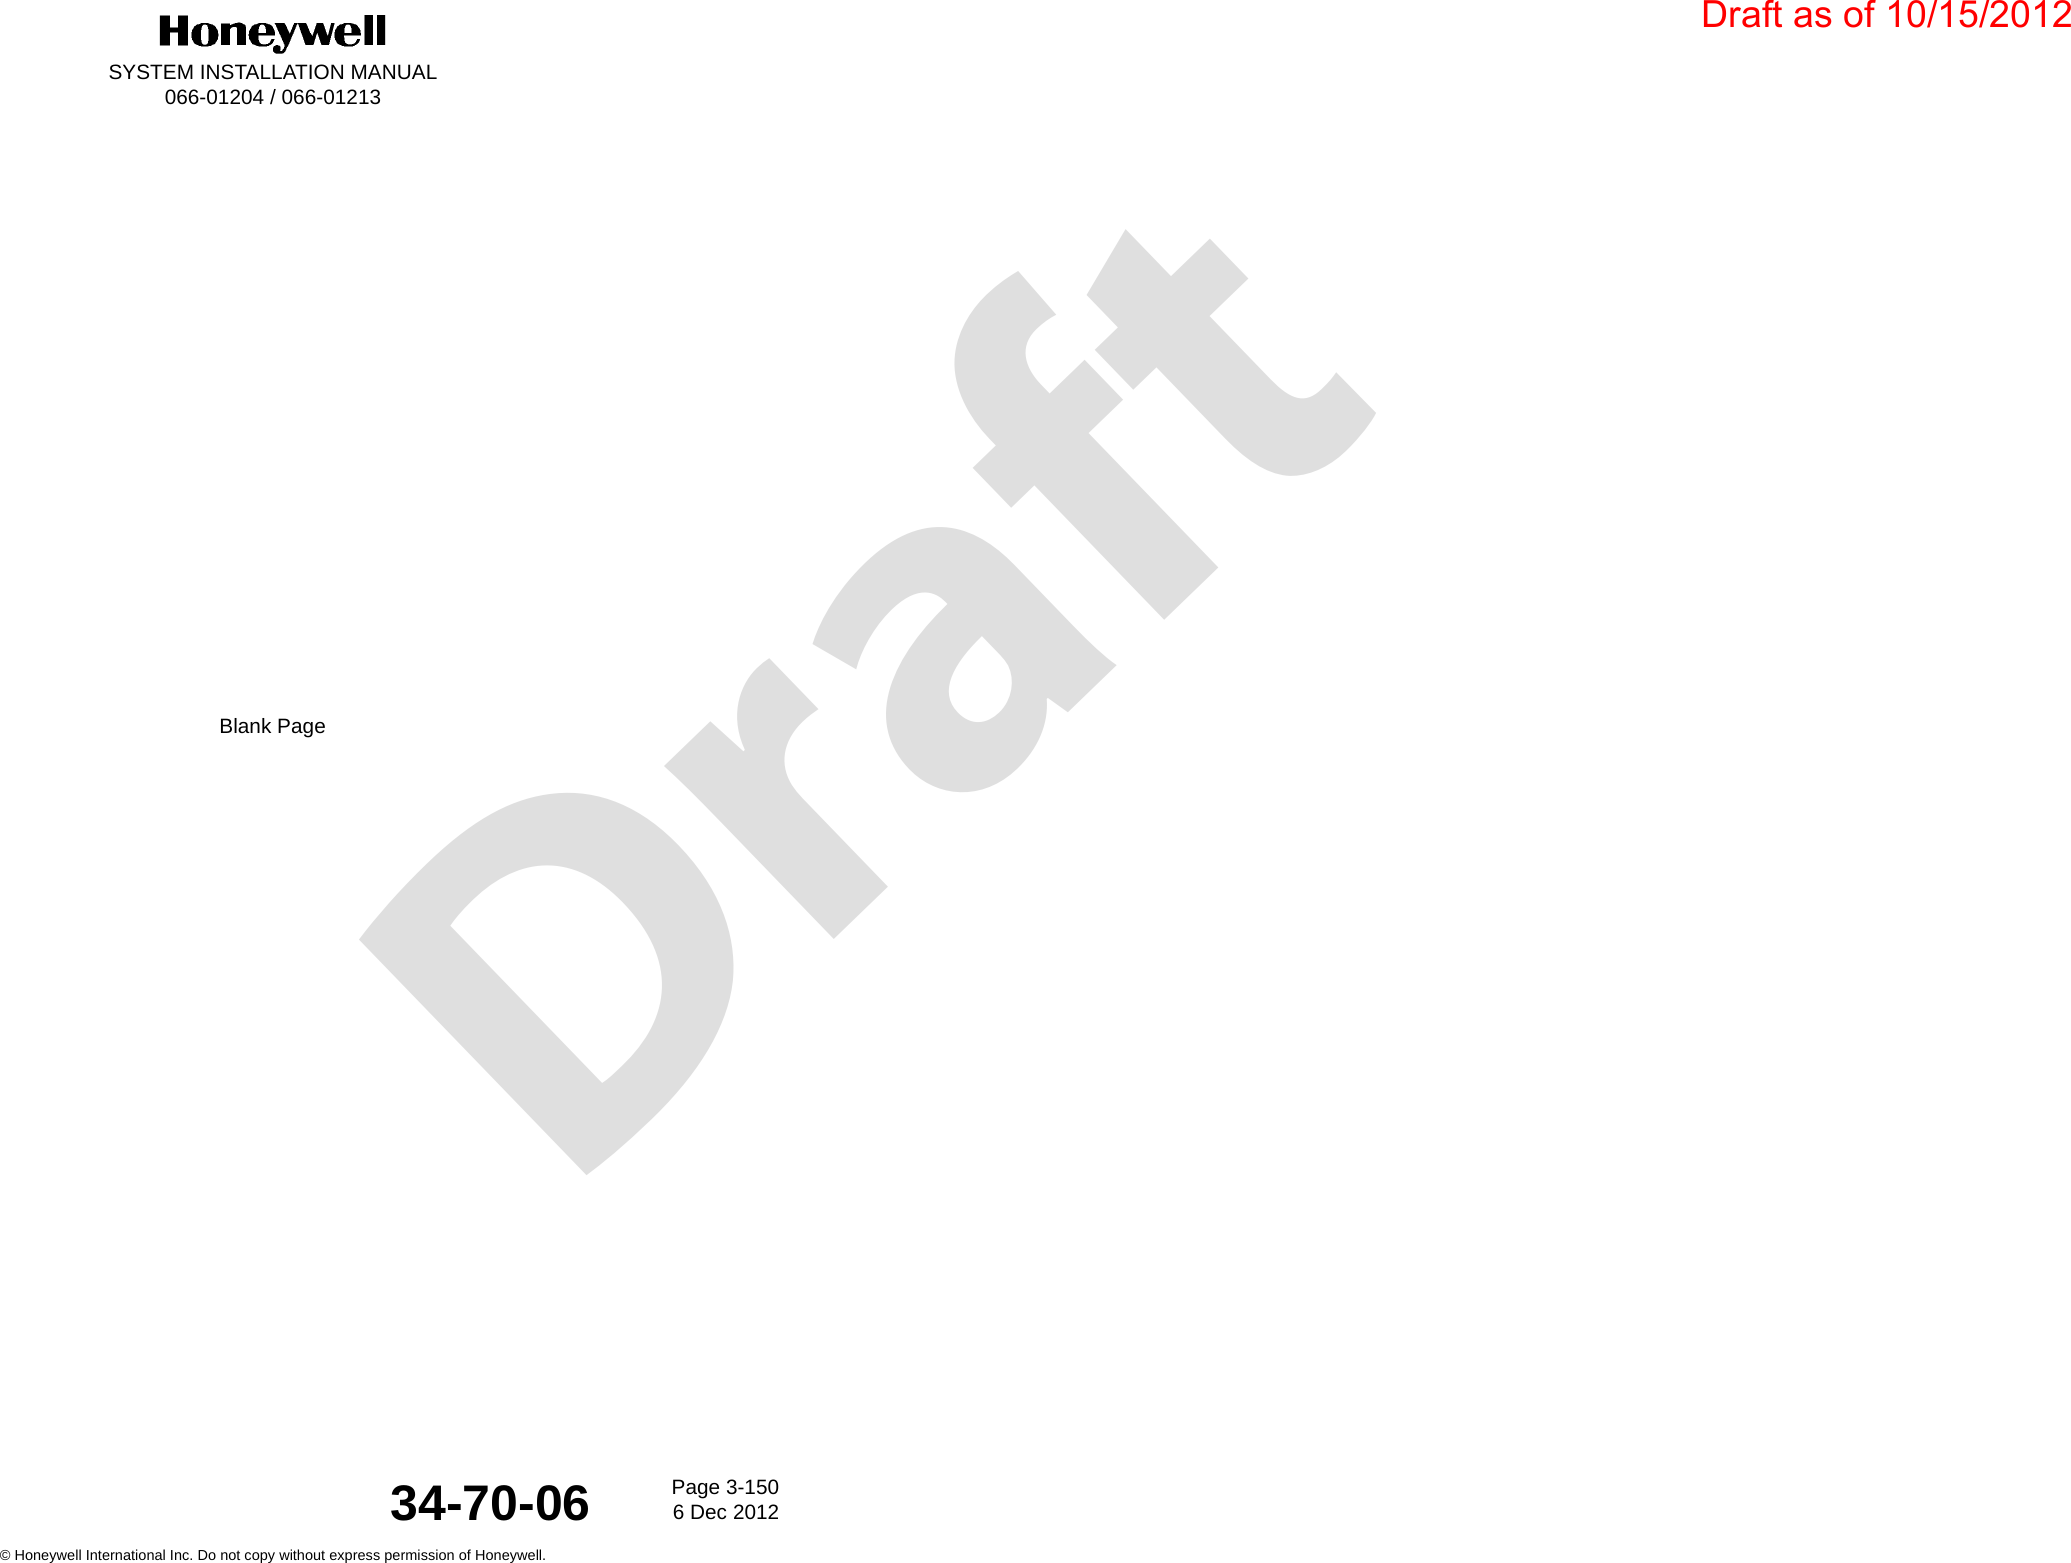 DraftSYSTEM INSTALLATION MANUAL066-01204 / 066-01213Page 3-1506 Dec 2012© Honeywell International Inc. Do not copy without express permission of Honeywell.34-70-06Blank PageDraft as of 10/15/2012